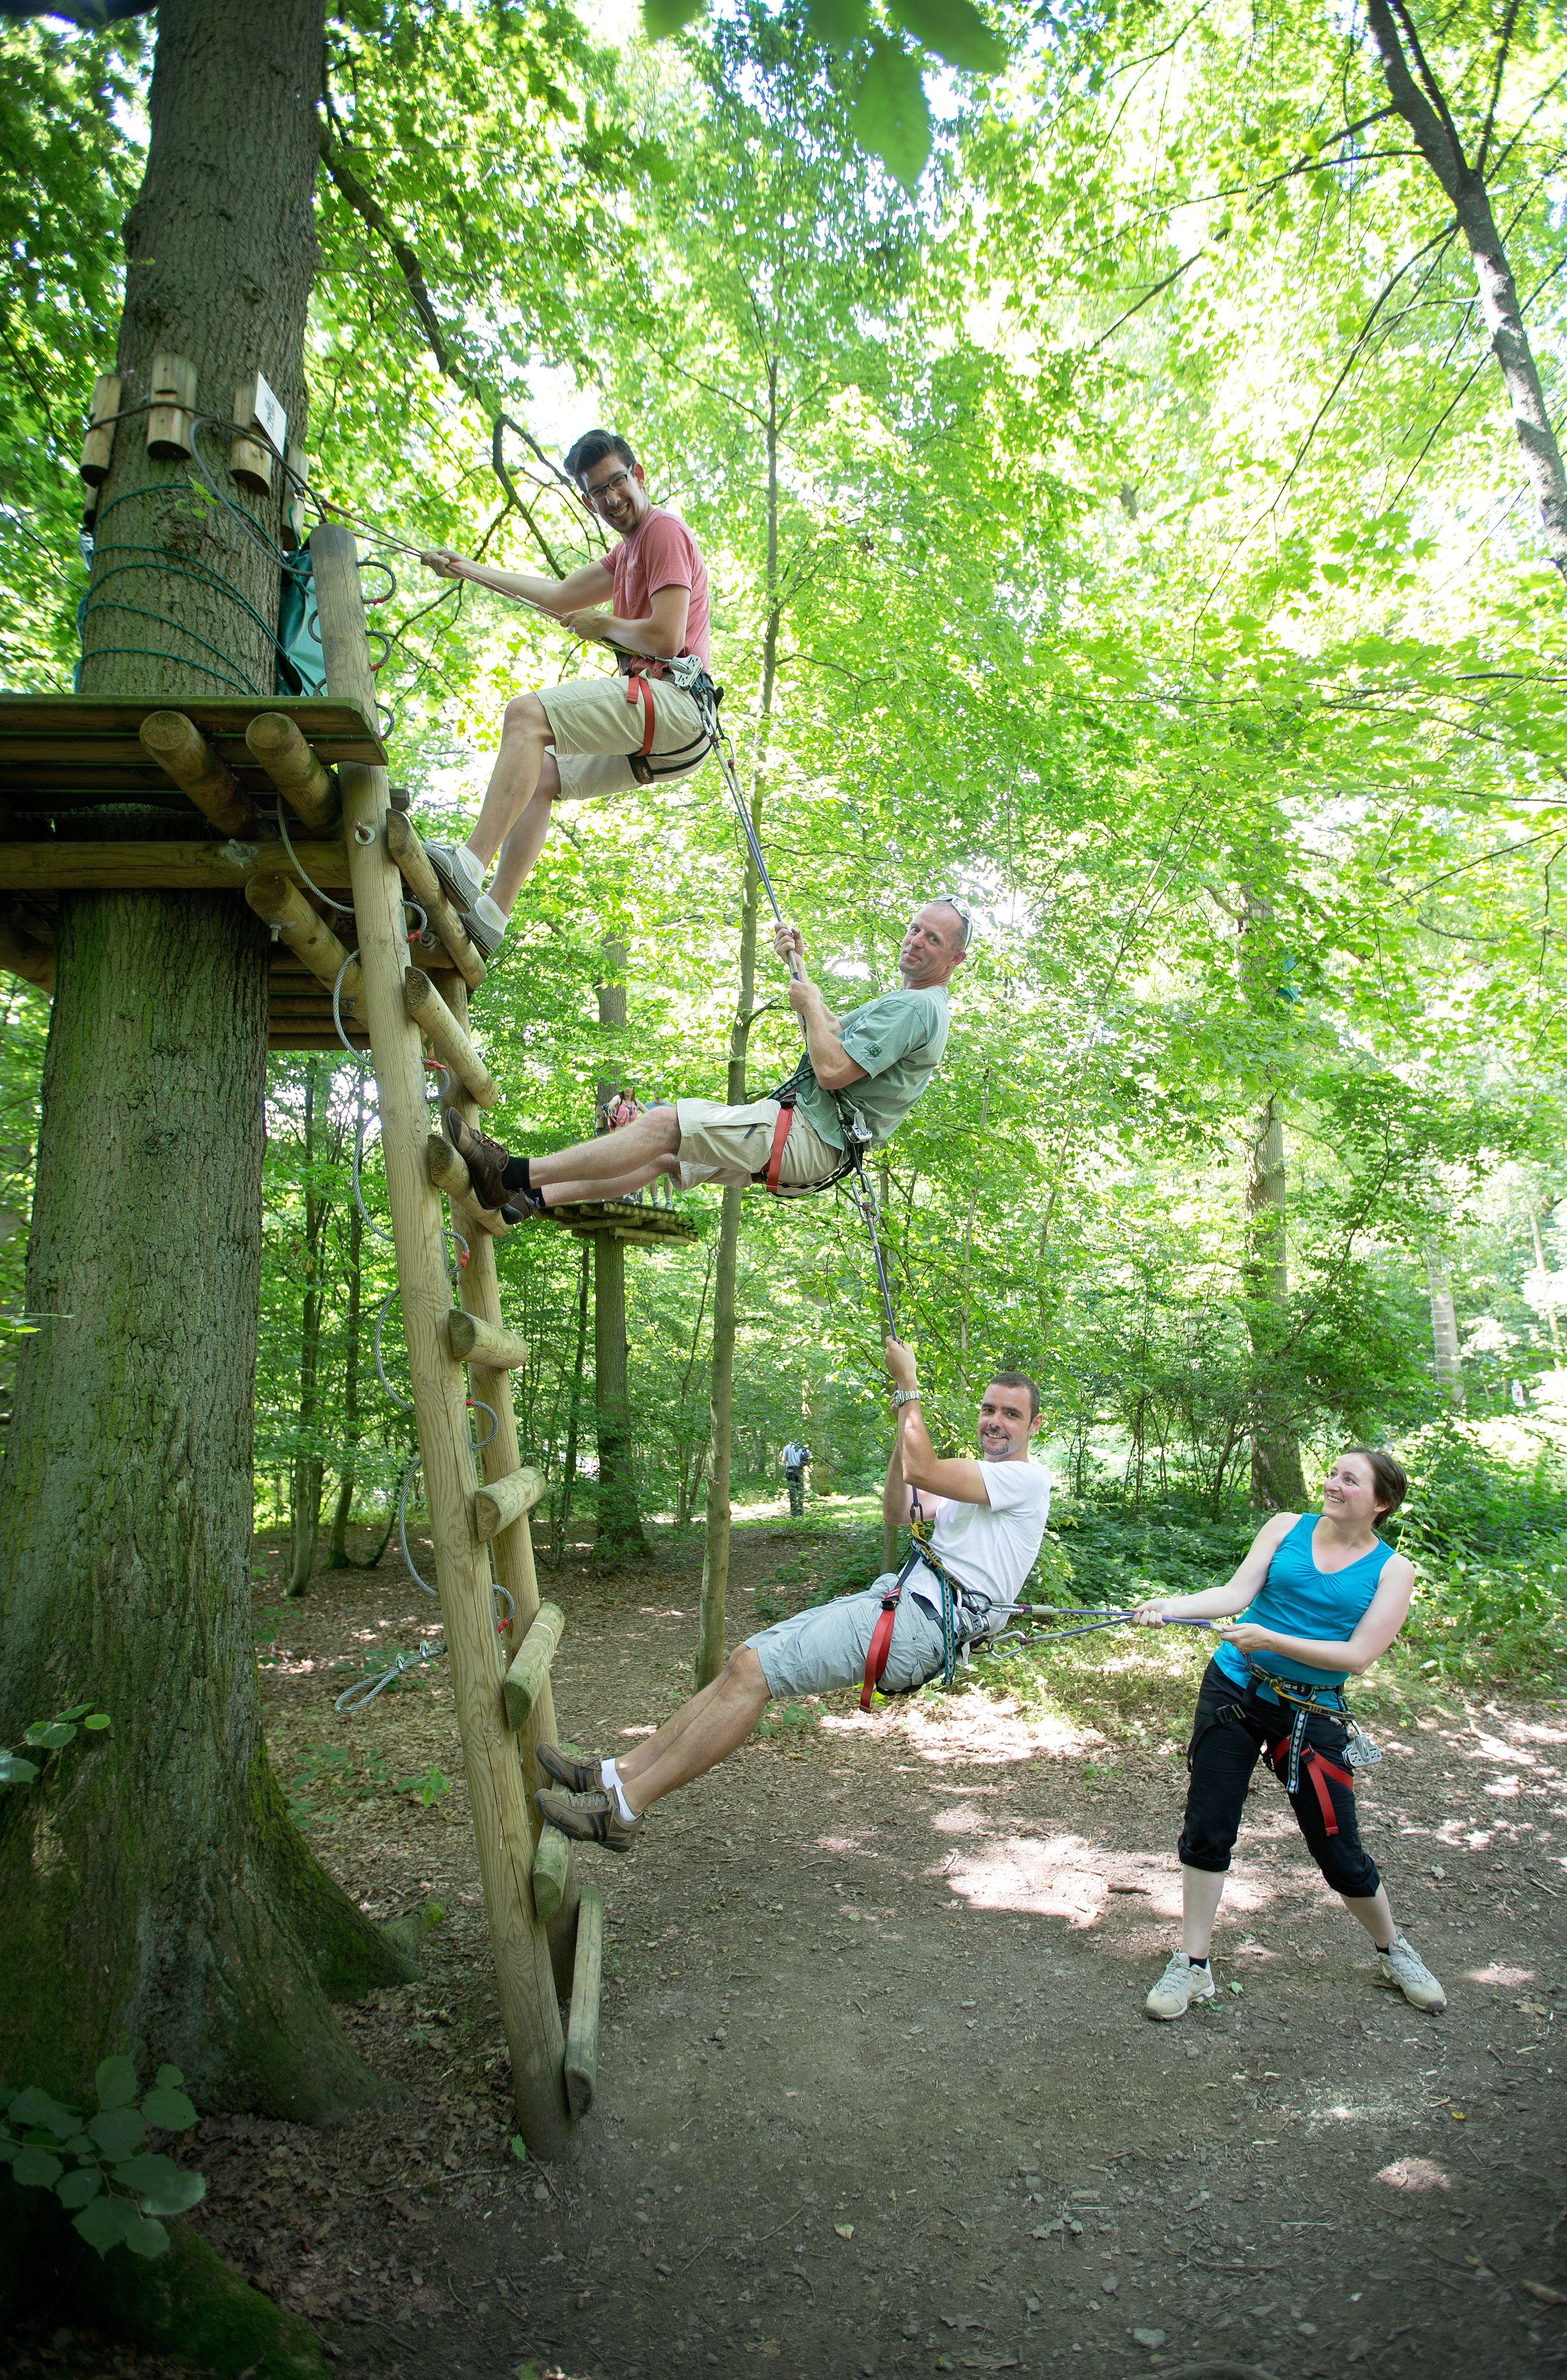 Explore the tree top trails in Natura Park, at the Eau d'Heure lakes